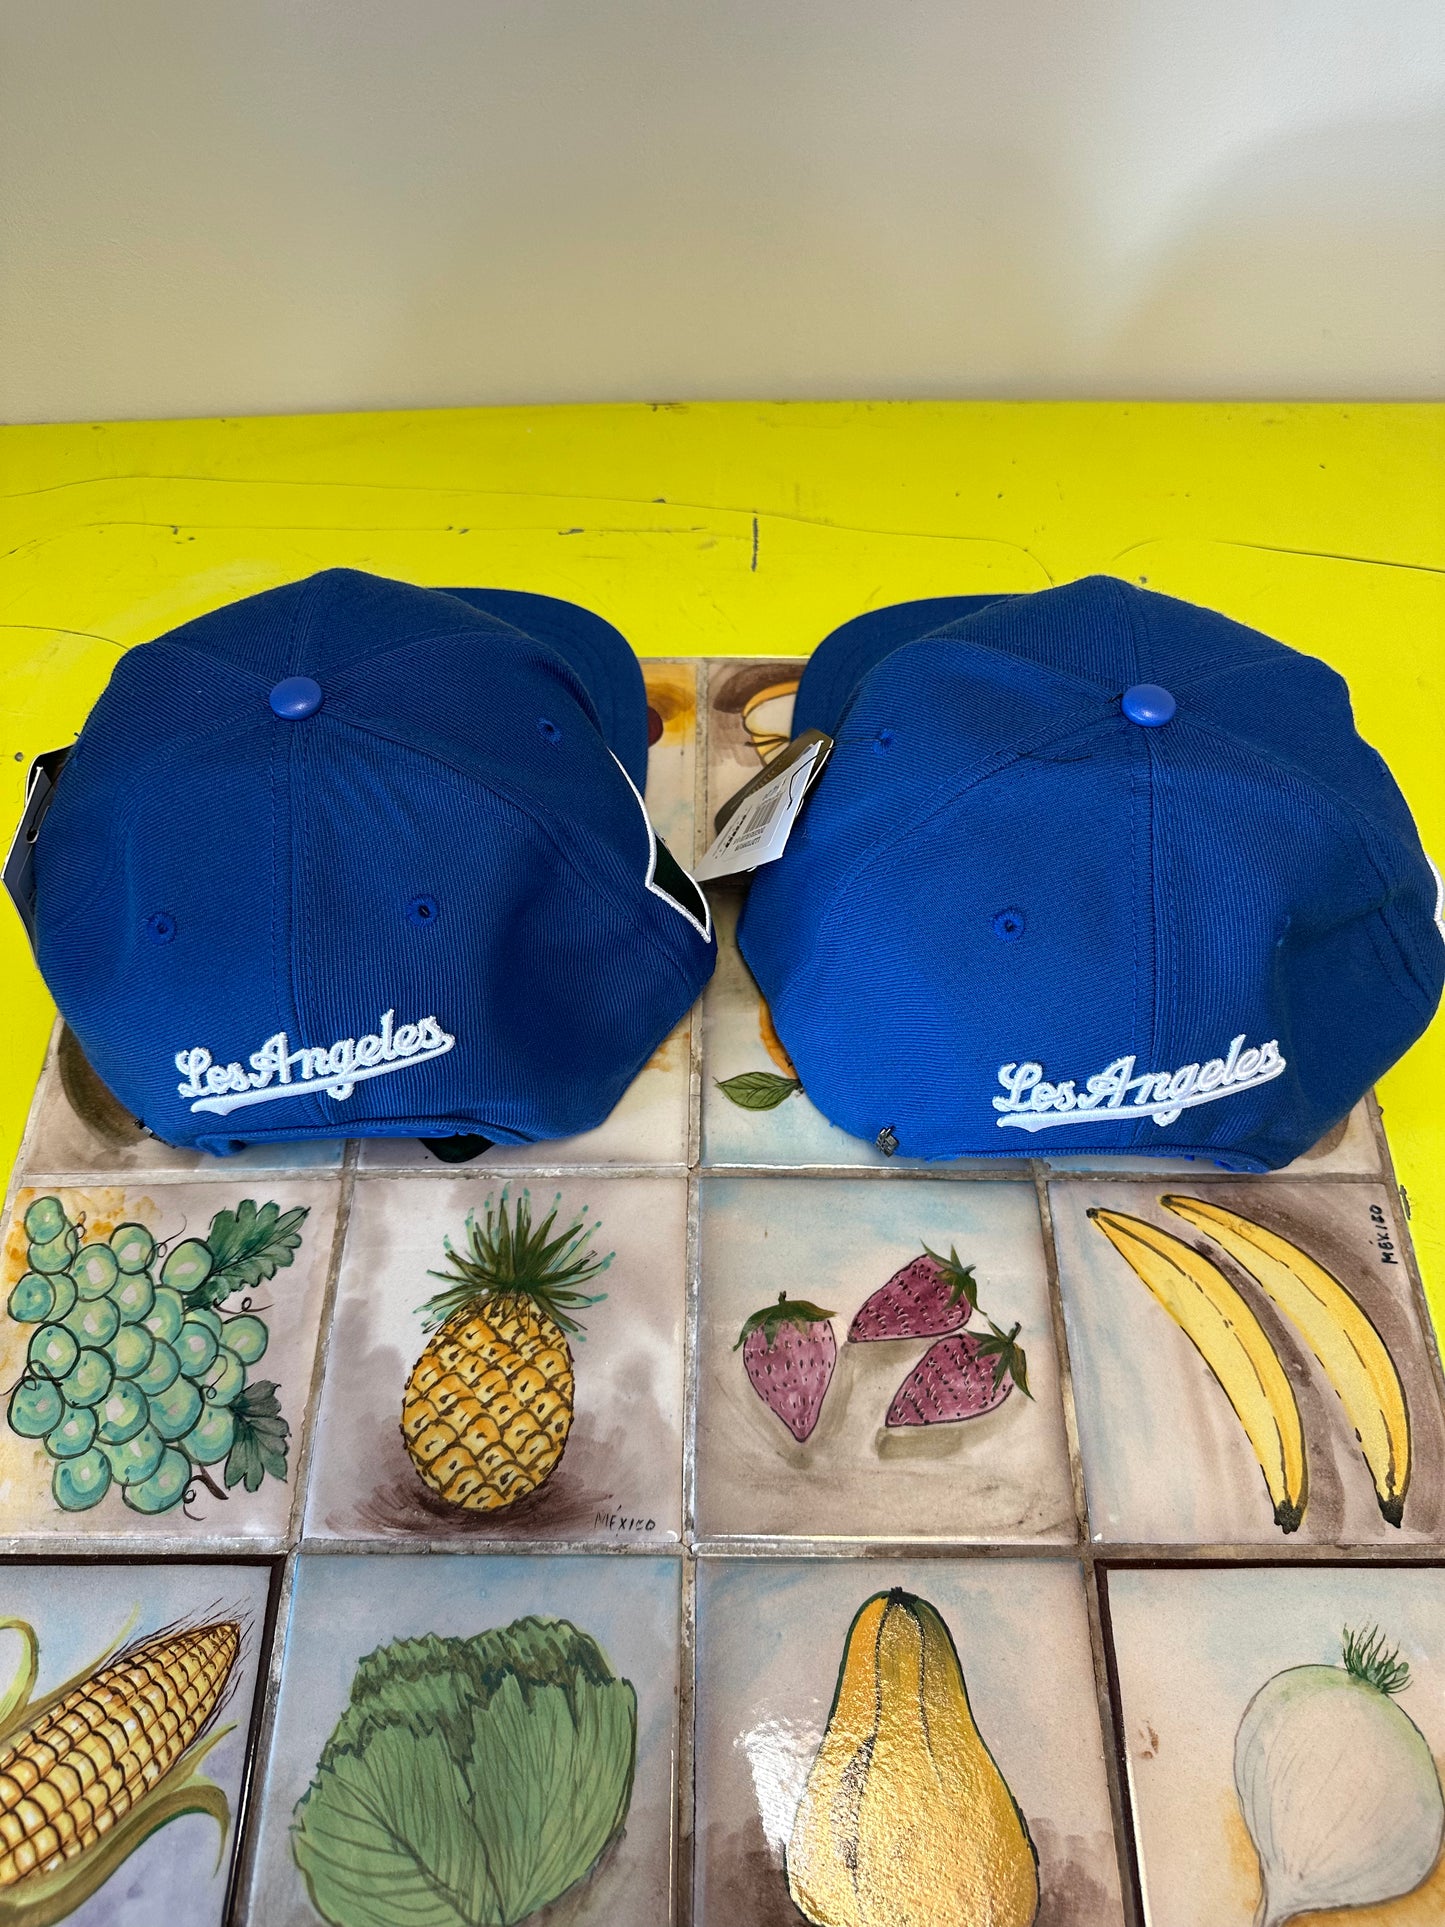 Dodgers Snapped Hat